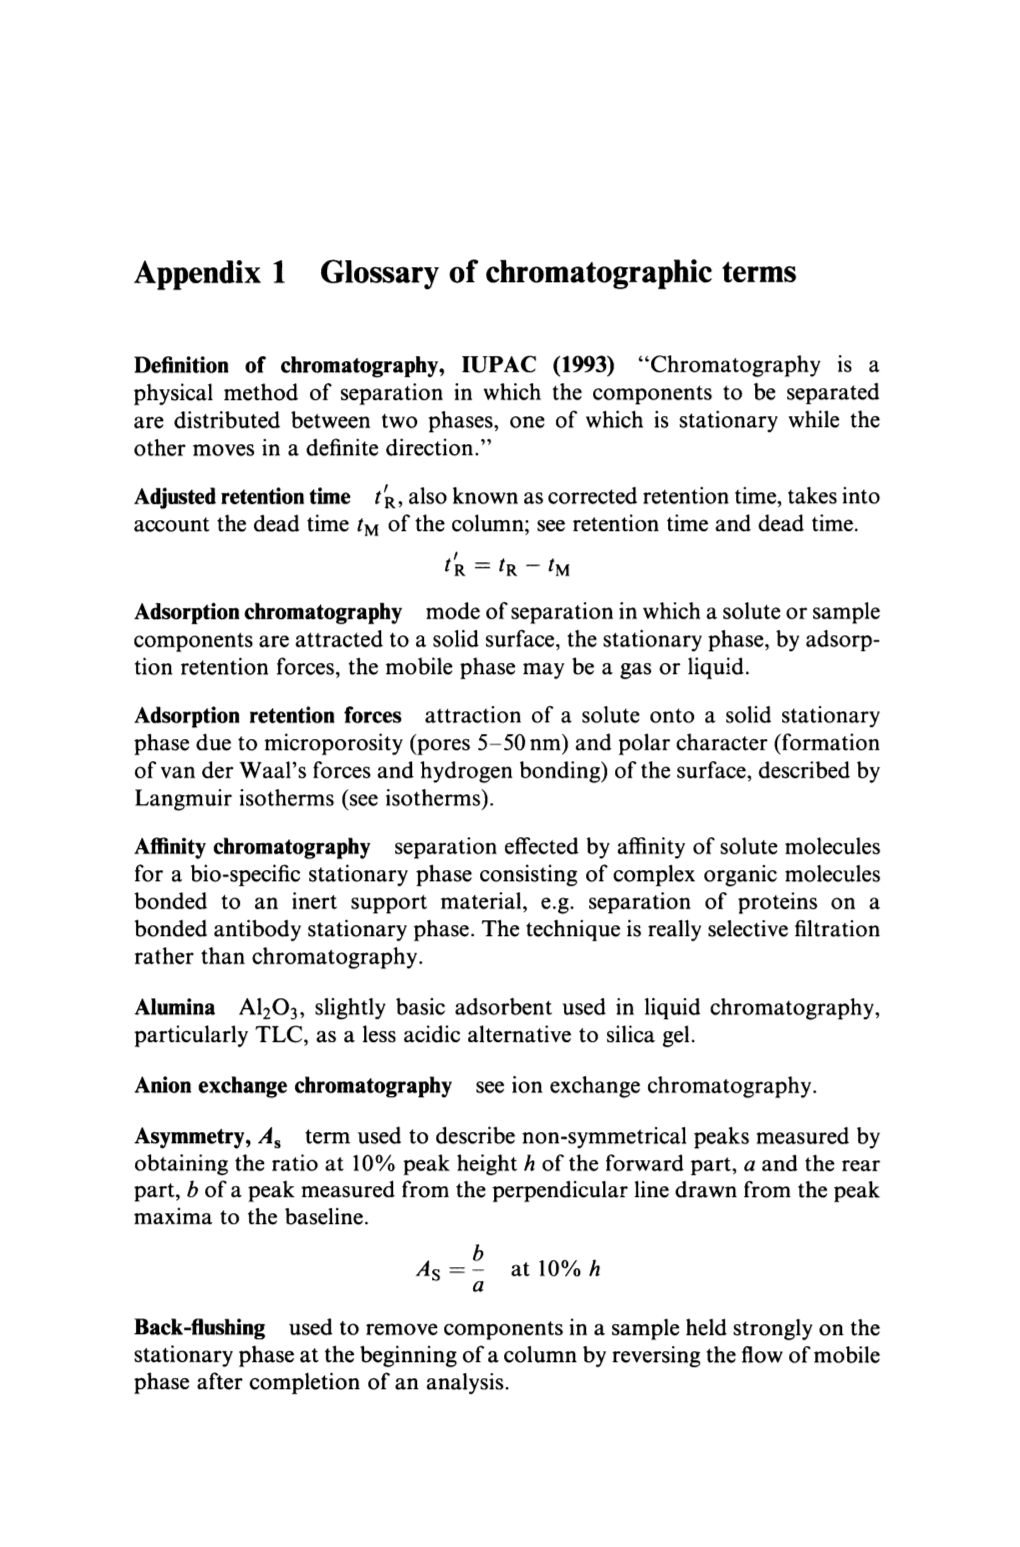 Appendix 1 Glossary of Chromatographic Terms